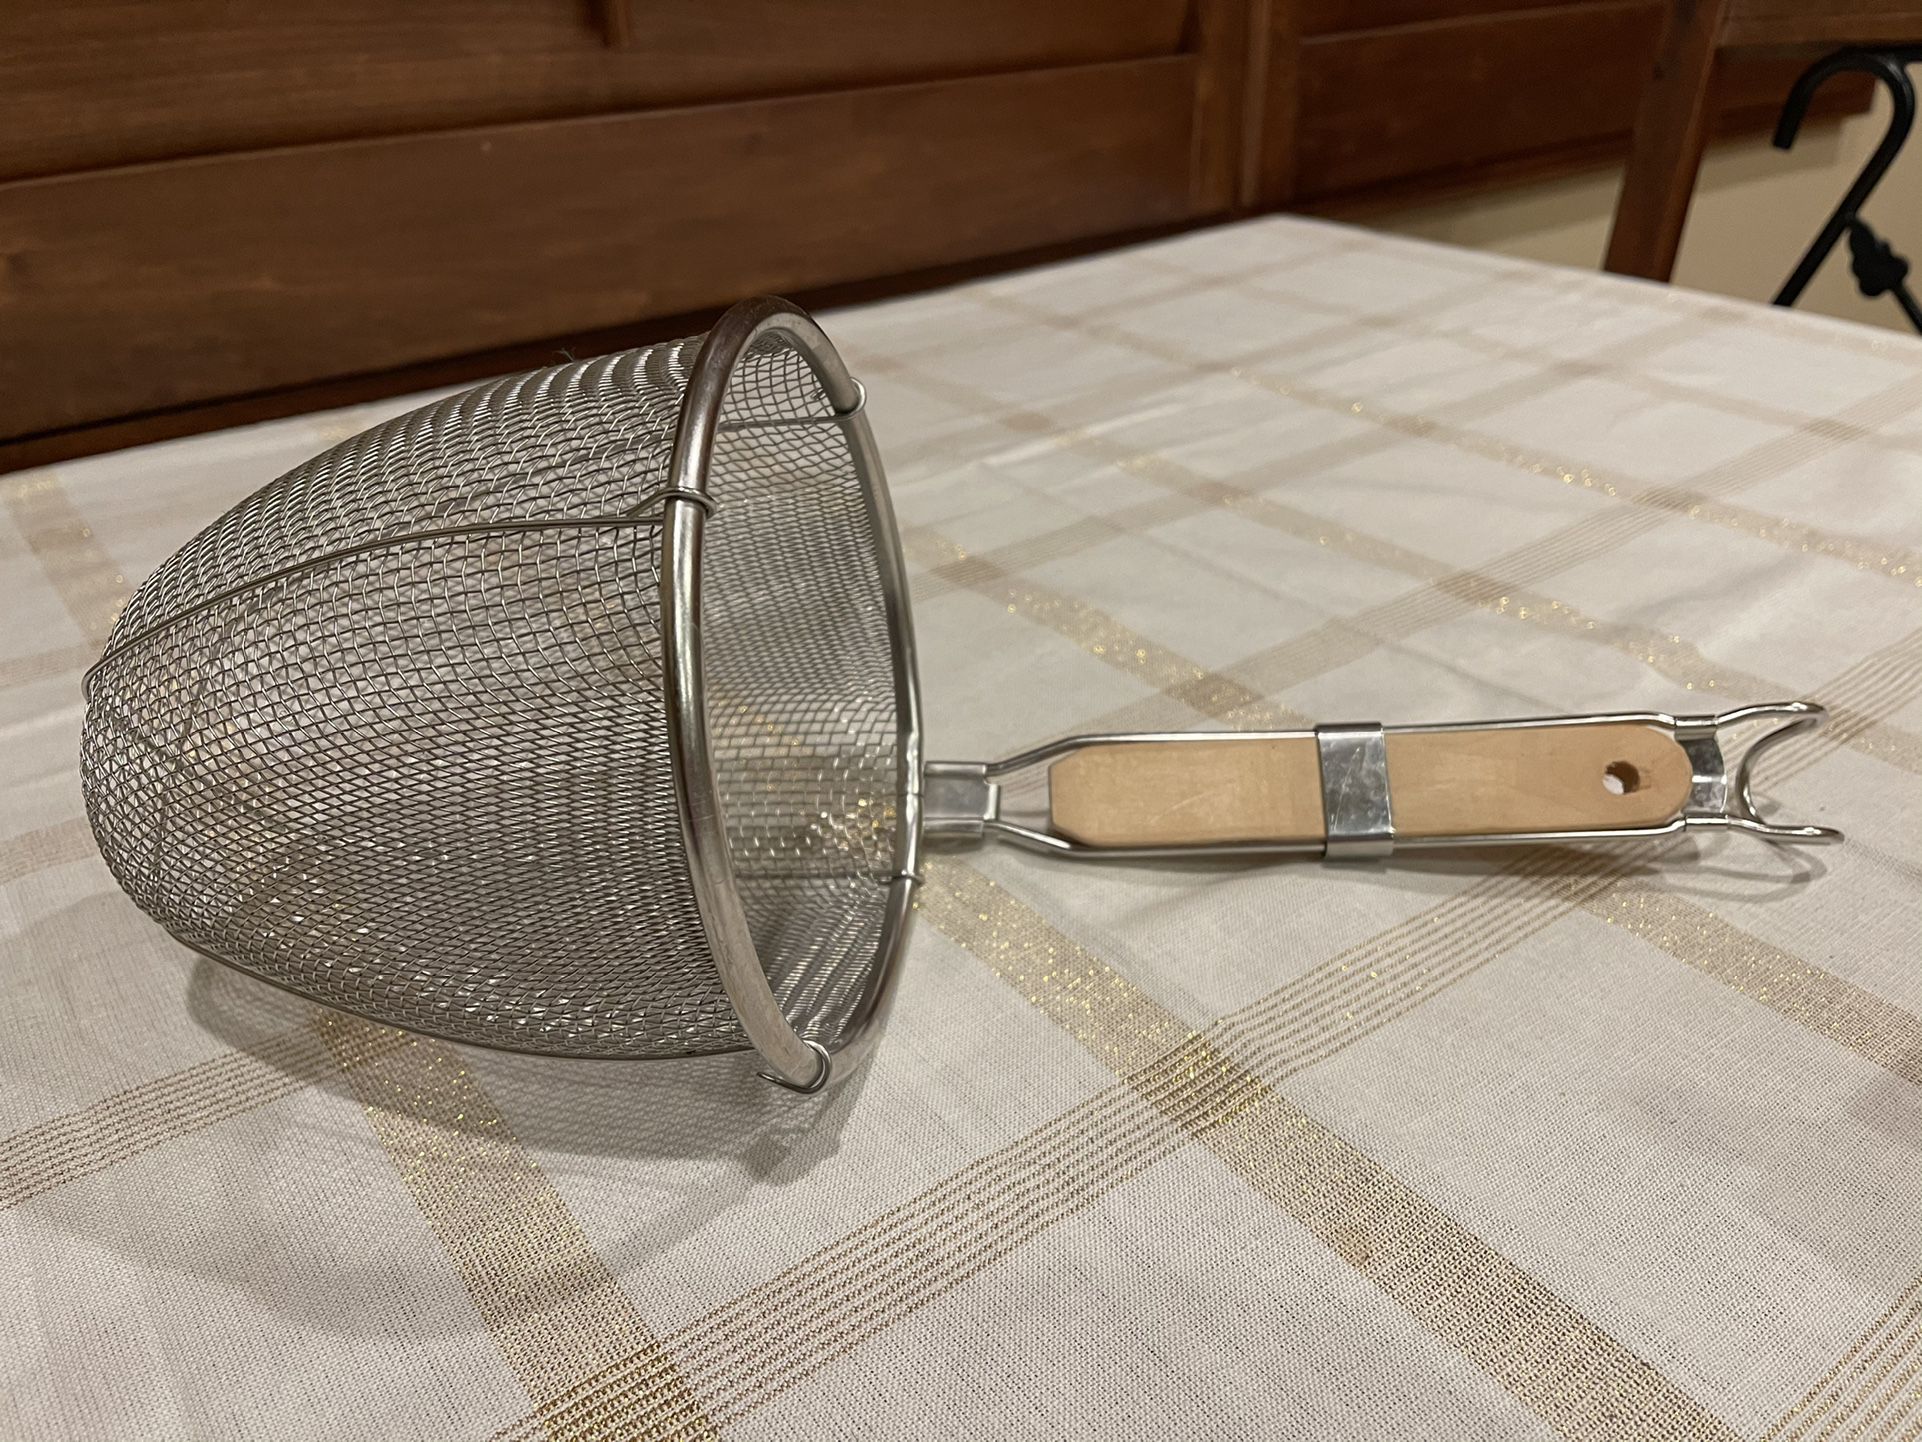 Stainless Steel Frying Basket/Strainer With Hook